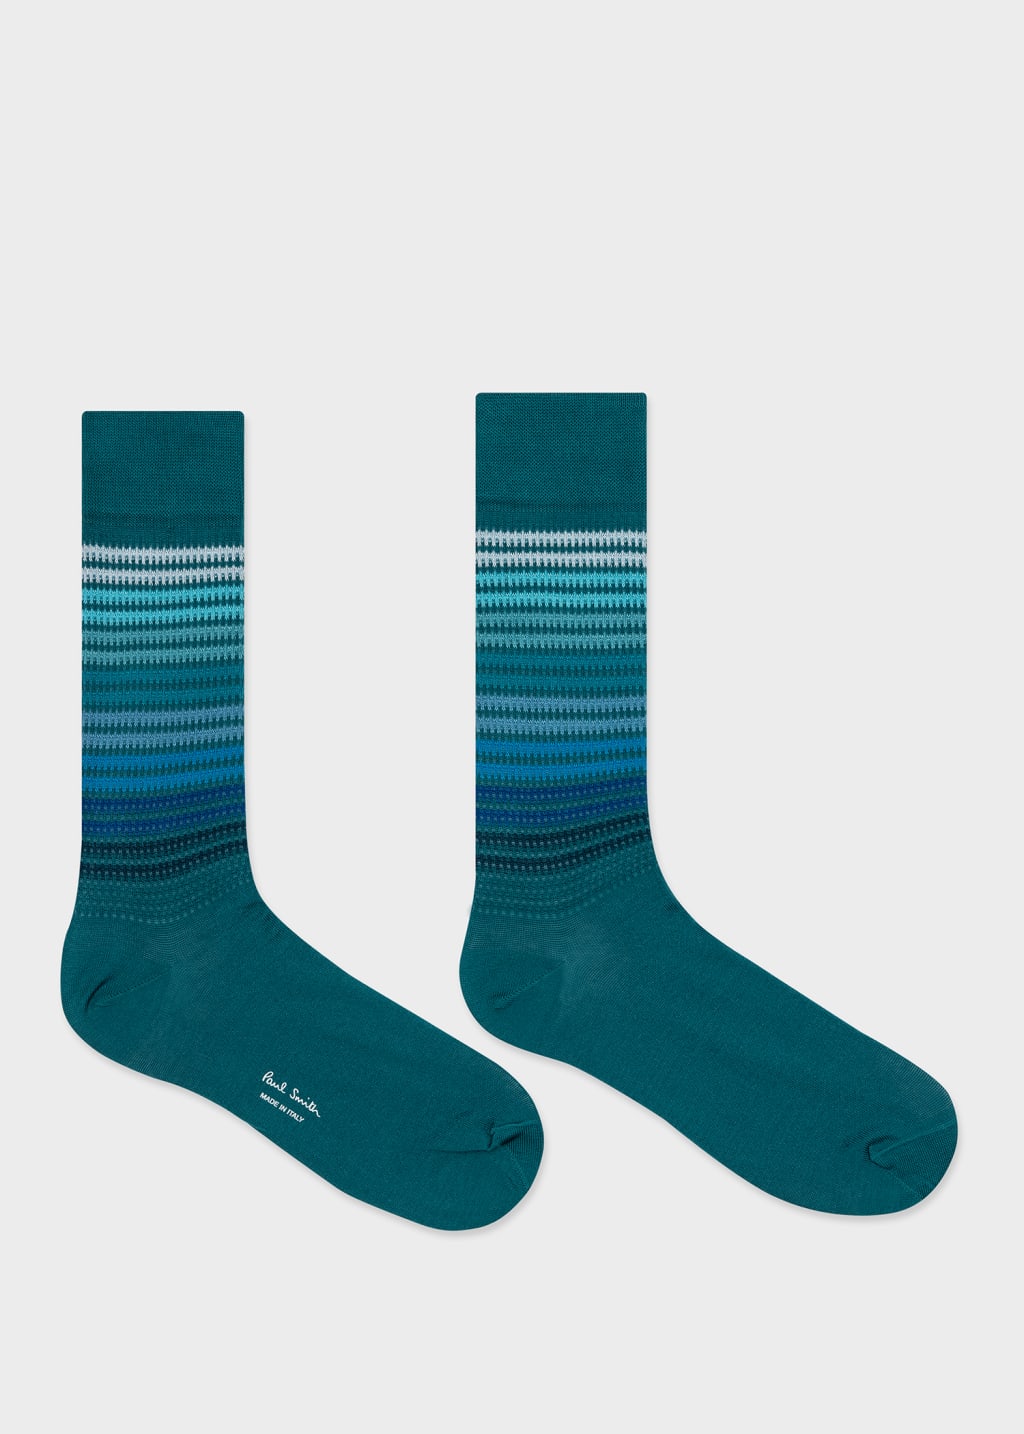 Pair View - Teal Embroidered Stripe Socks Paul Smith